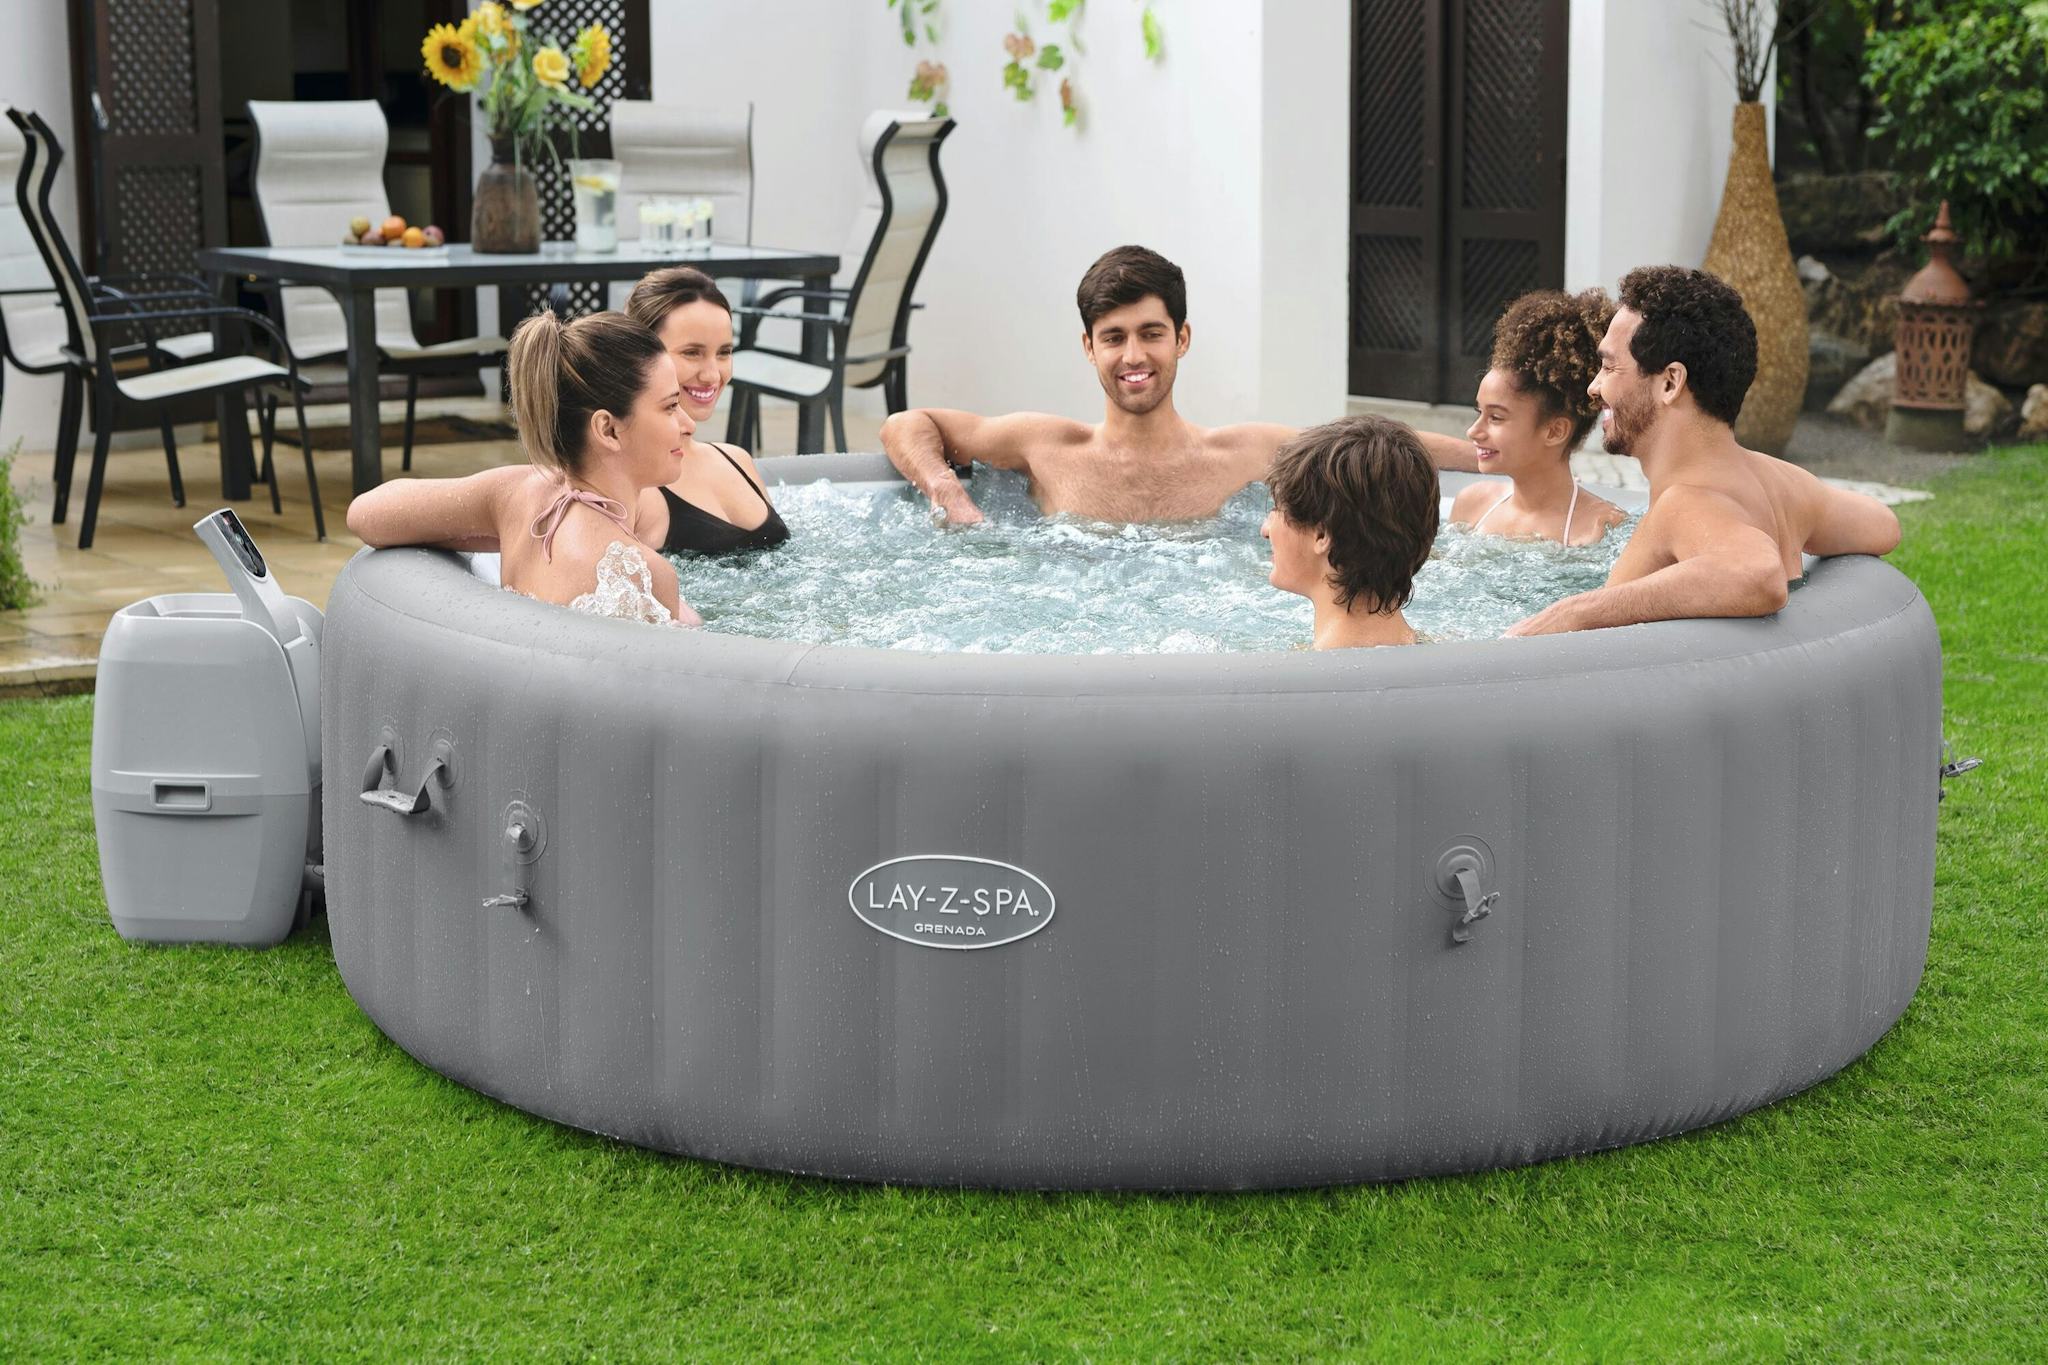 Spas Gonflables Spa gonflable rond Lay-Z-Spa Grenada Airjet™ 6 - 8 personnes Bestway 4